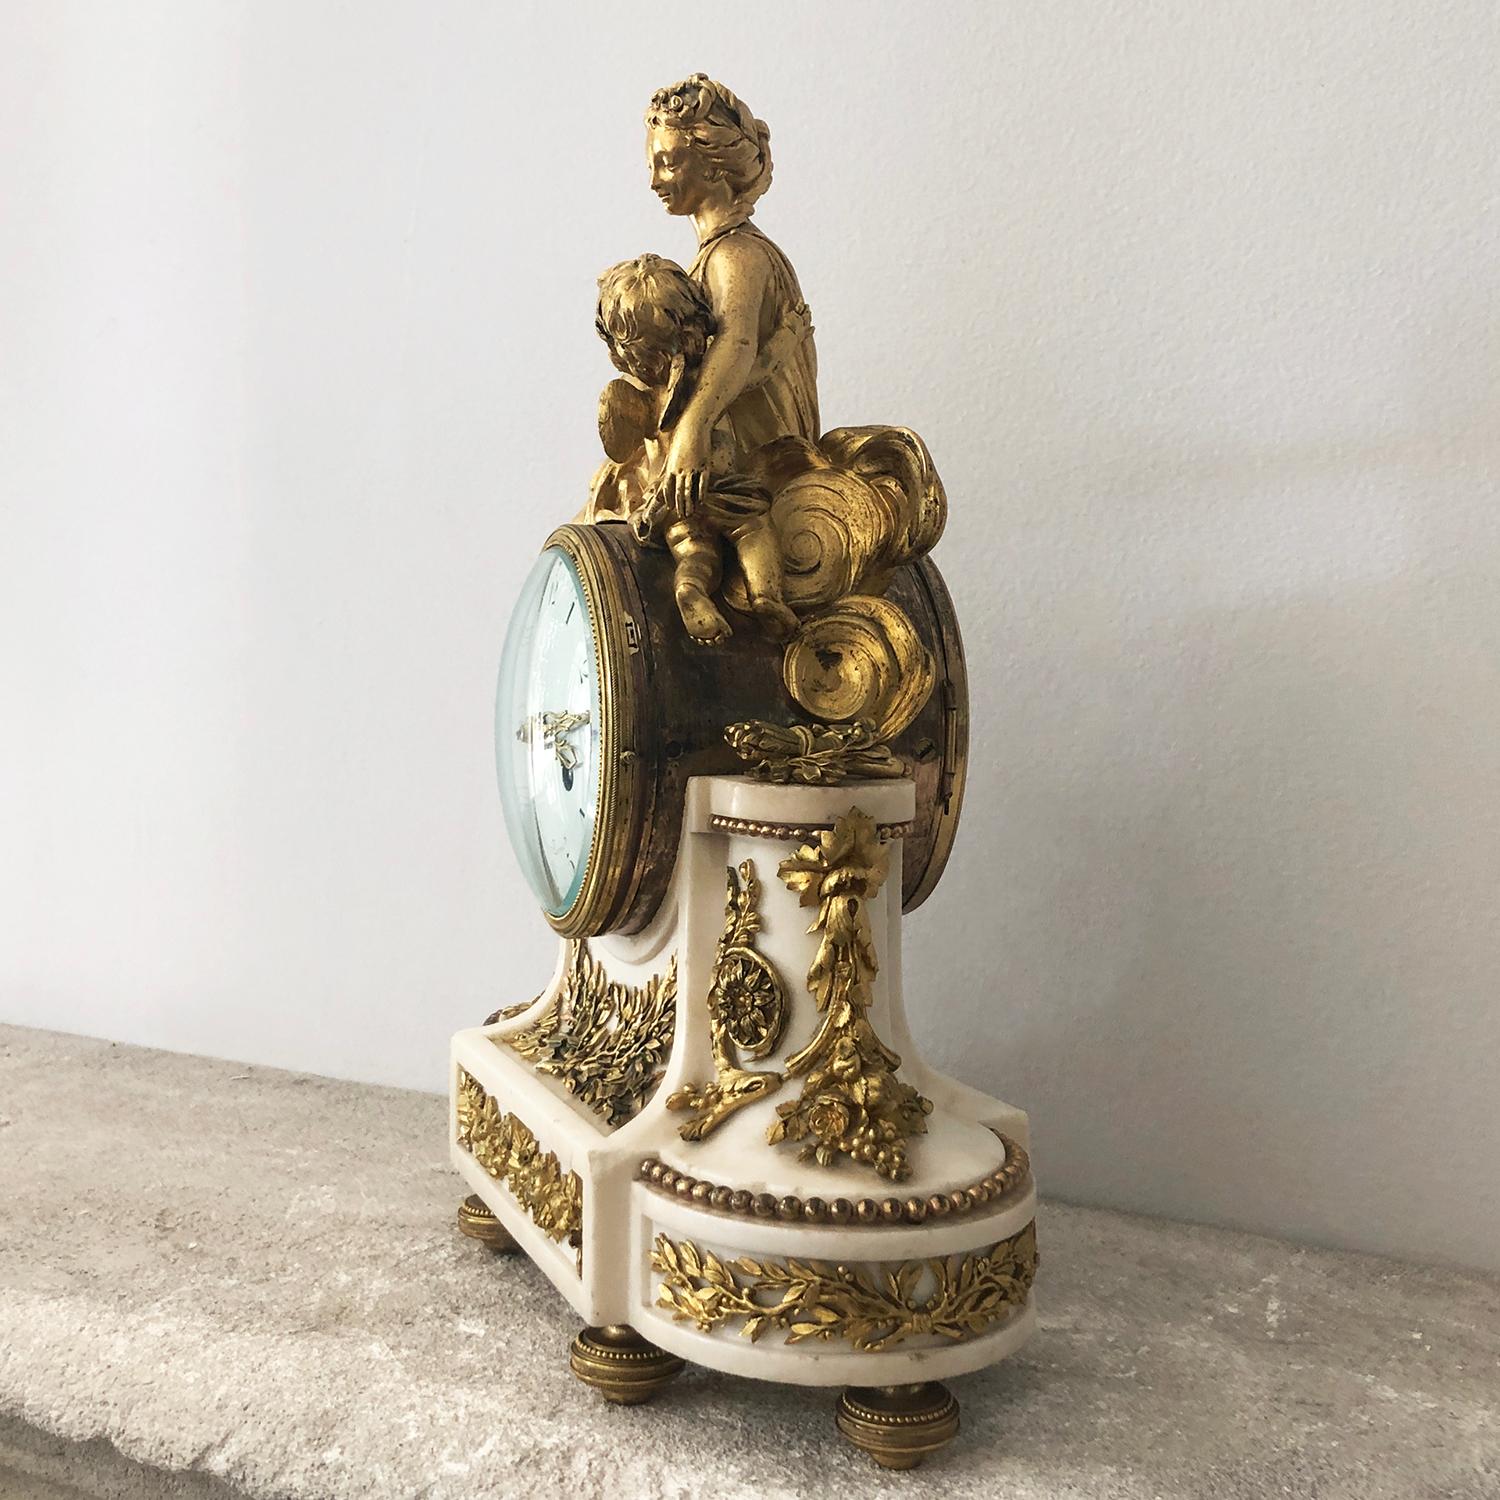 Gilt 18th Century French Marble, Gilded Bronze Clock by Jean-Baptiste-André Furet